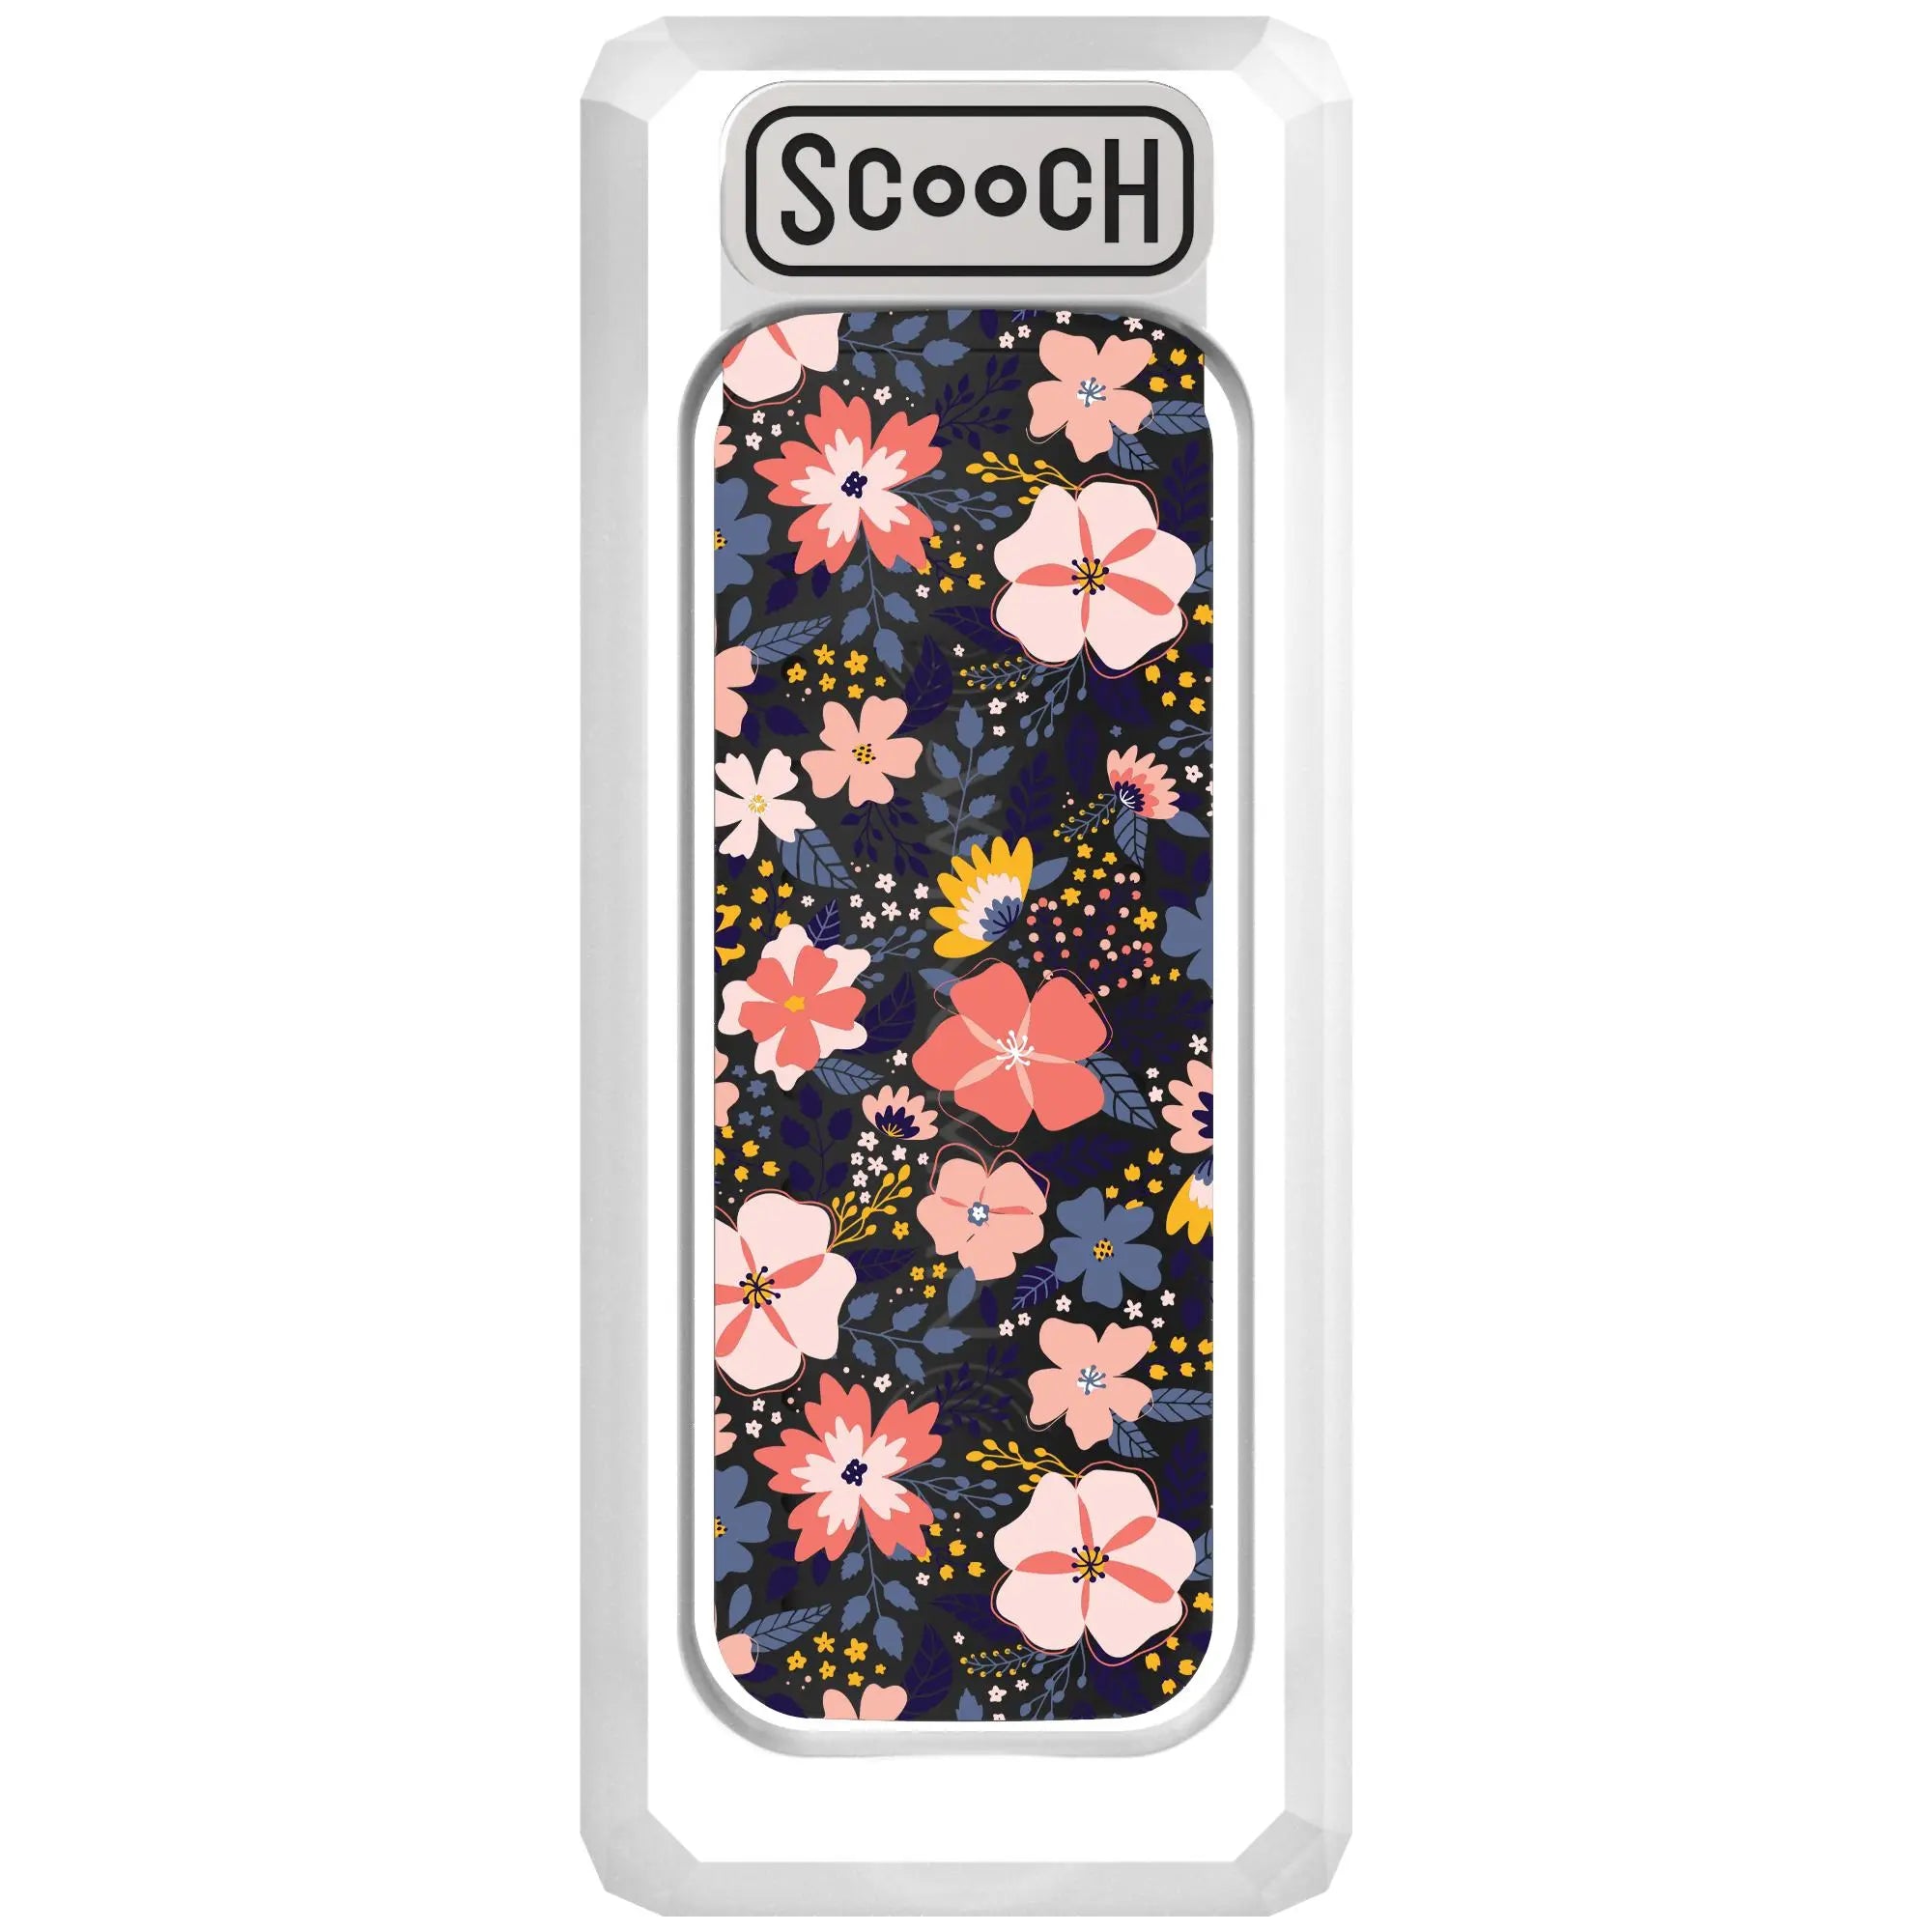 Scooch-Wingback - Pop Out Kickstand & Grip for Any Phone Case-Wildflowers